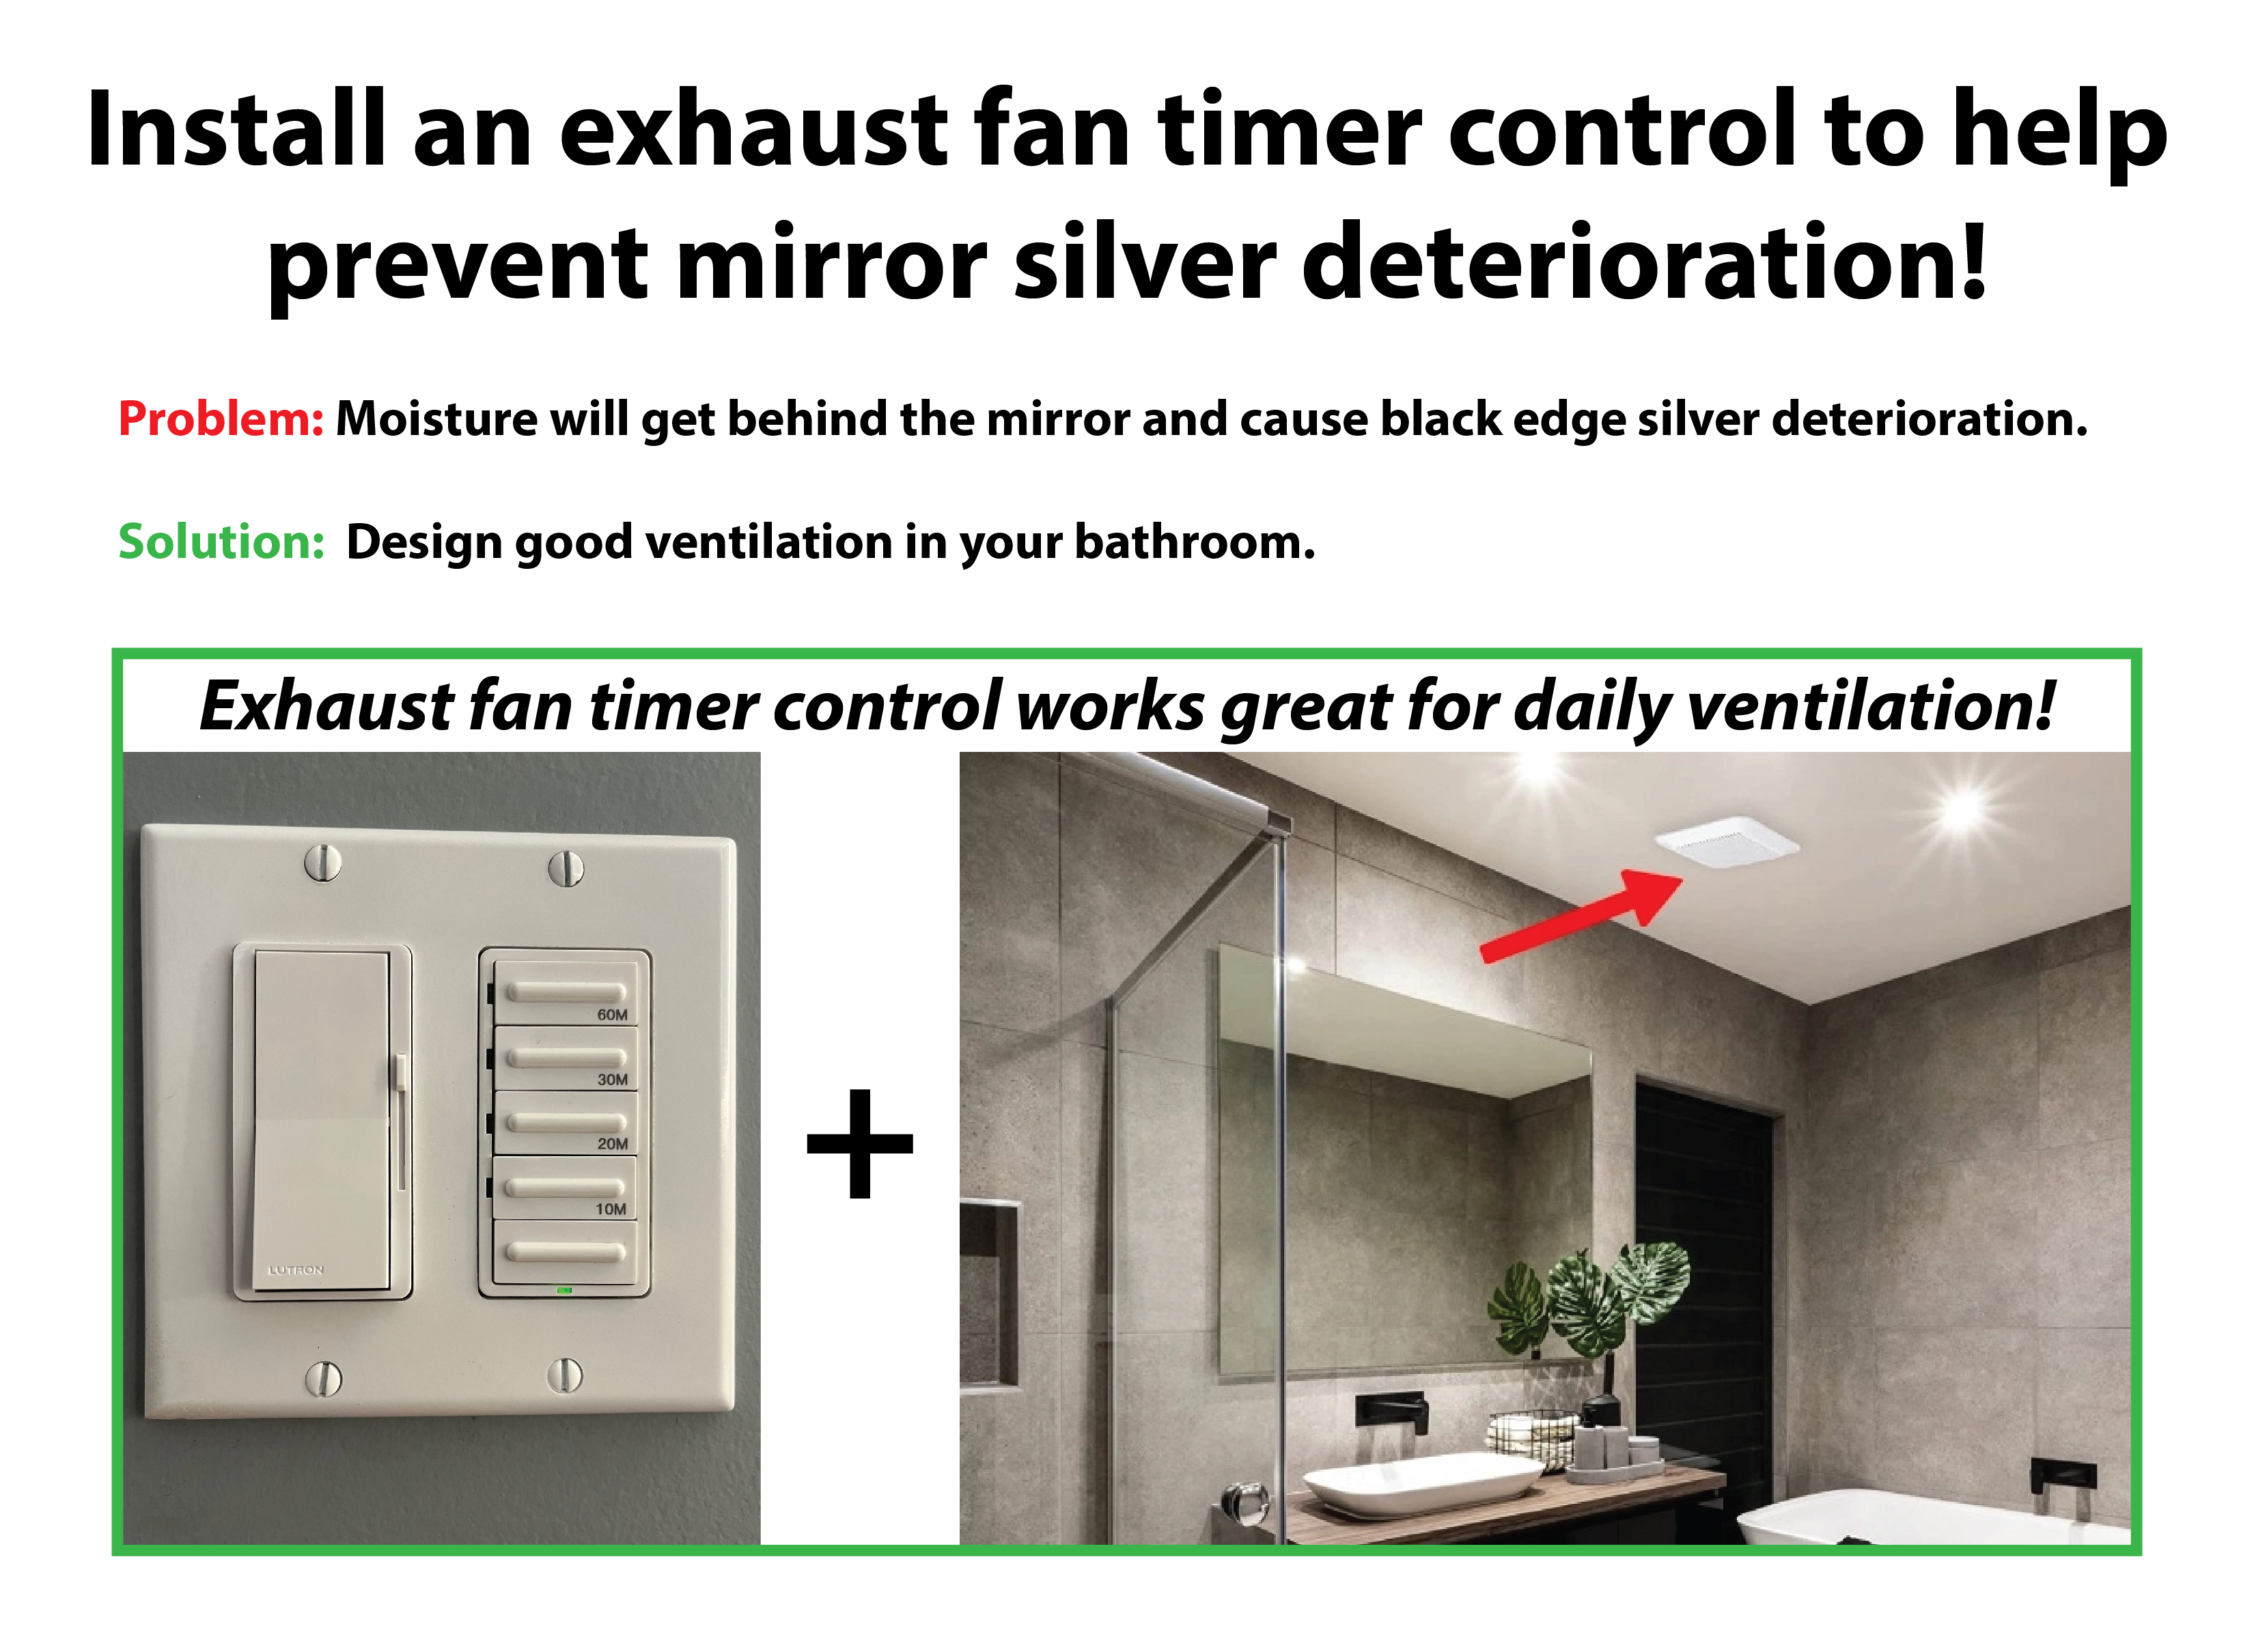 Install an exhaust fan timer control to help prevent mirror silver deterioration!